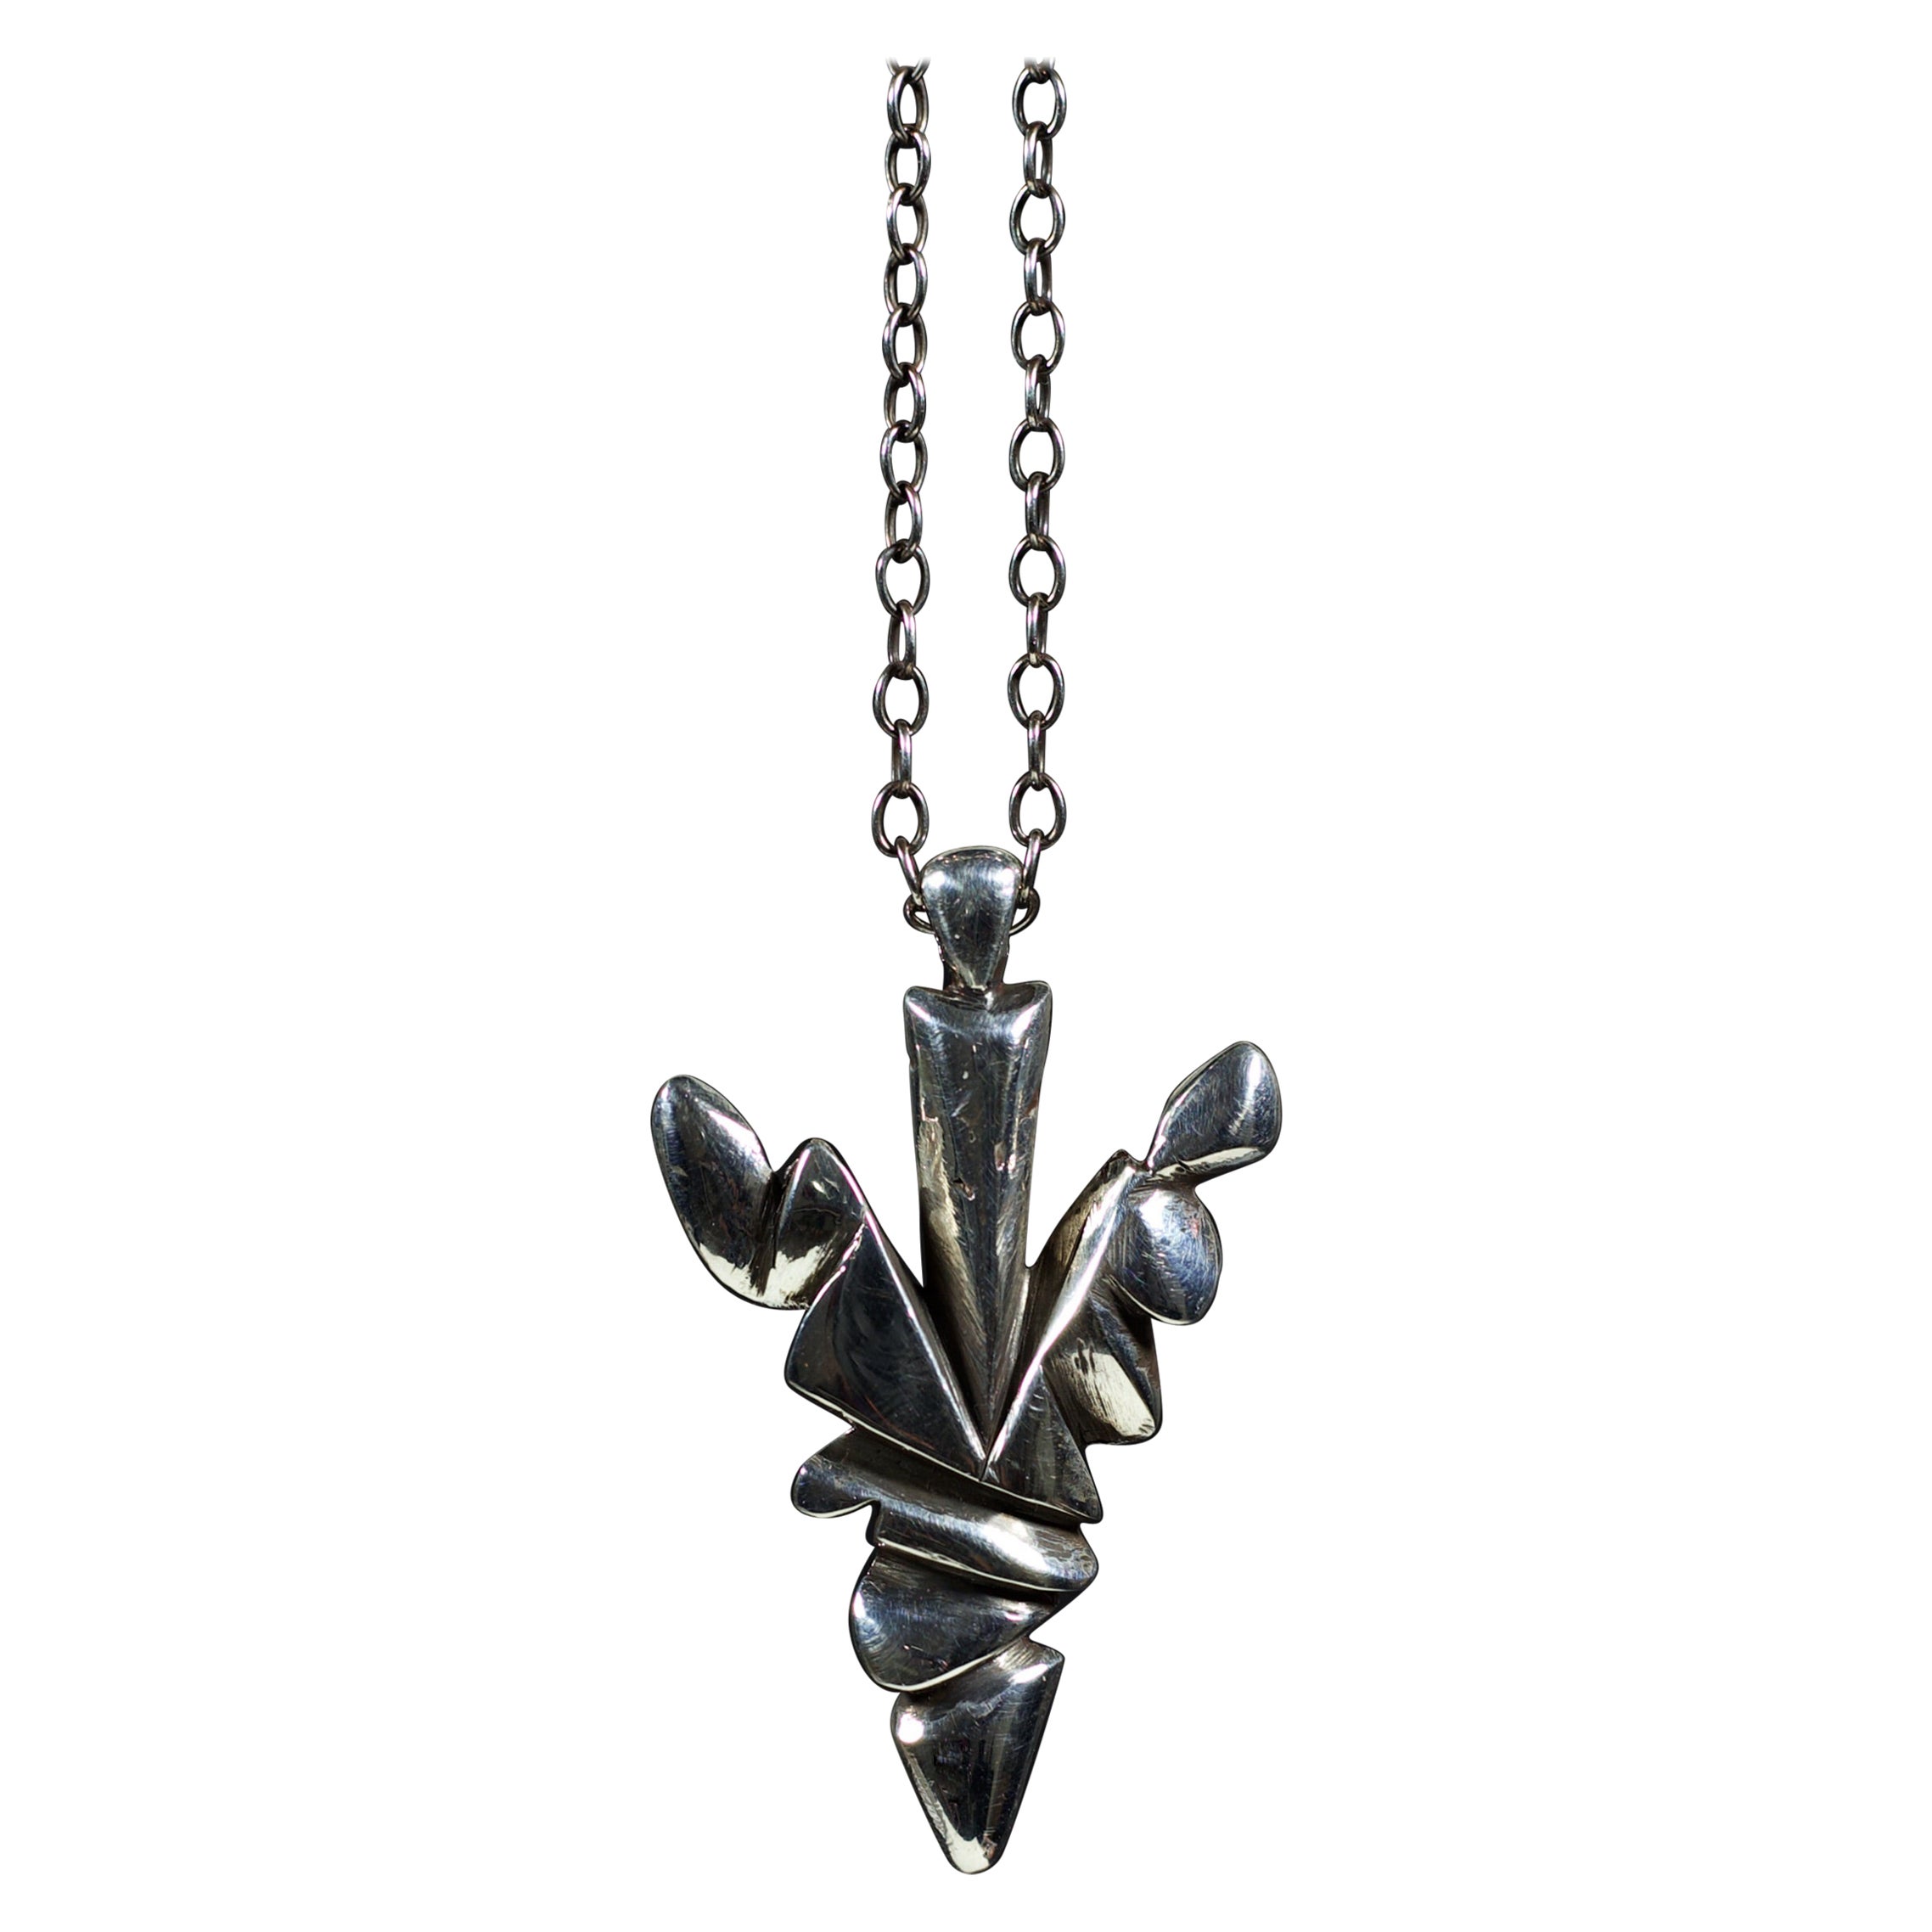 Hand-carved and cast by Ken Fury, the Arrowhead pendant is a symbol of strength, resilience, courage, and determination.

Pendant size: 45 mm x 28 mm

A 20-inch sterling silver chain is included.